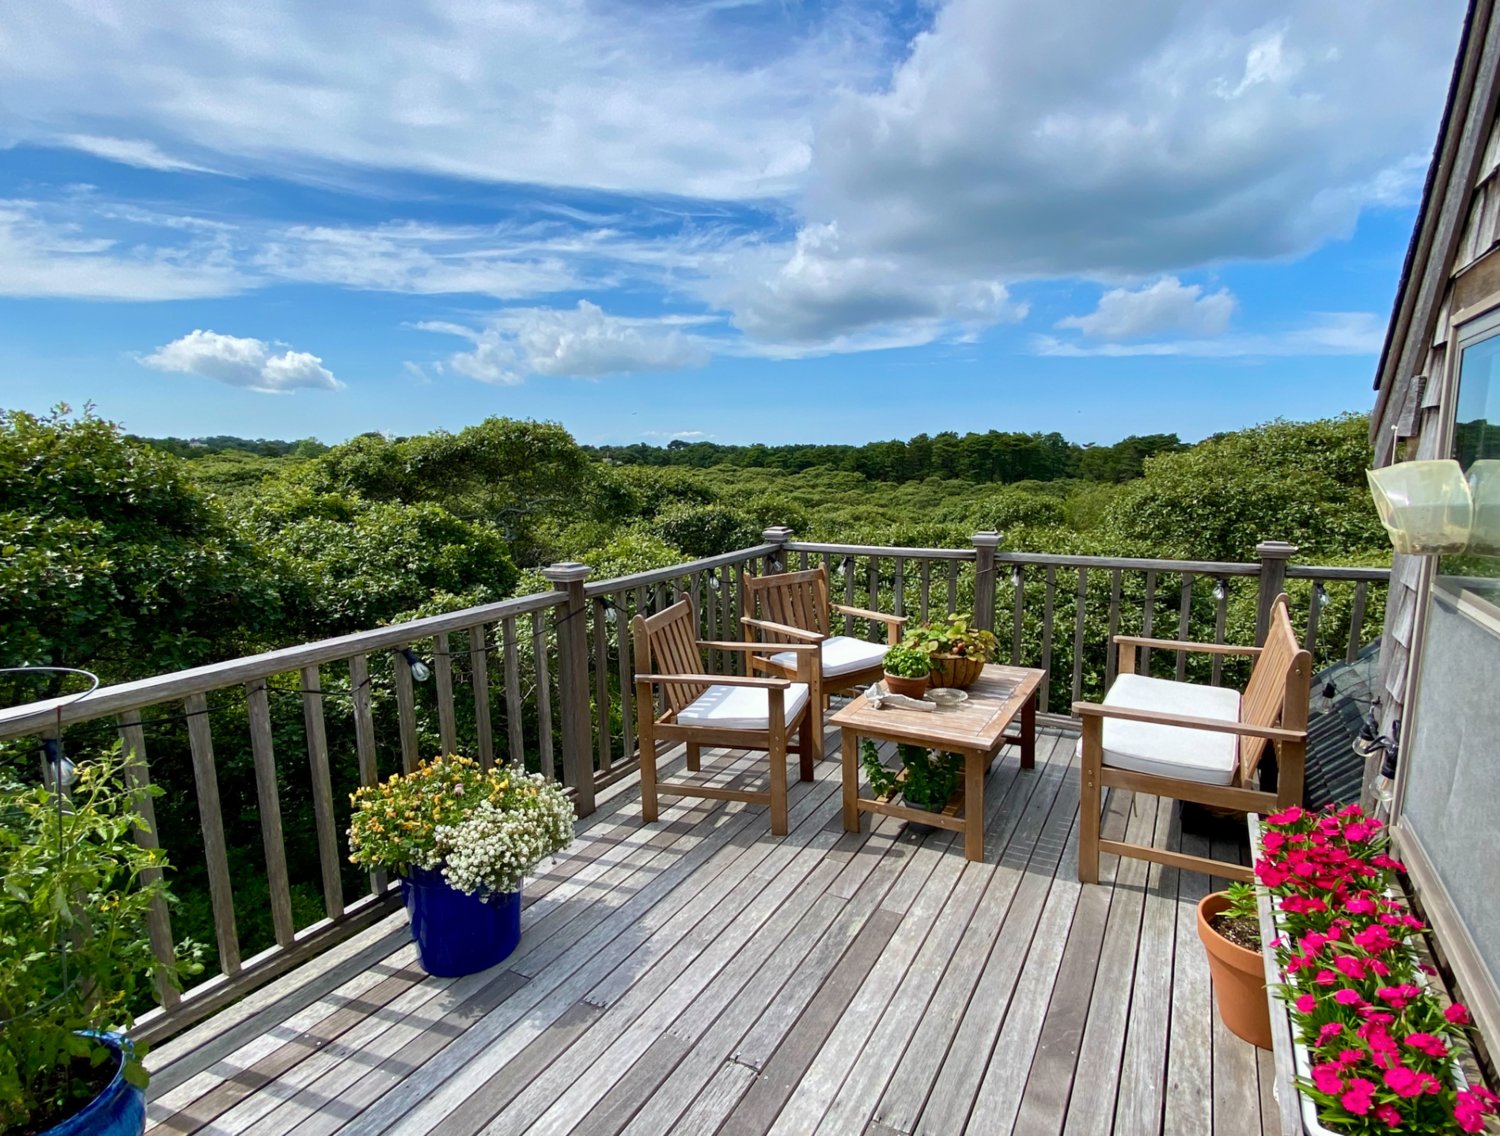 The wood deck overlooking hundreds of acres of conservation land is the perfect spot to greet the day or catch the sunset.